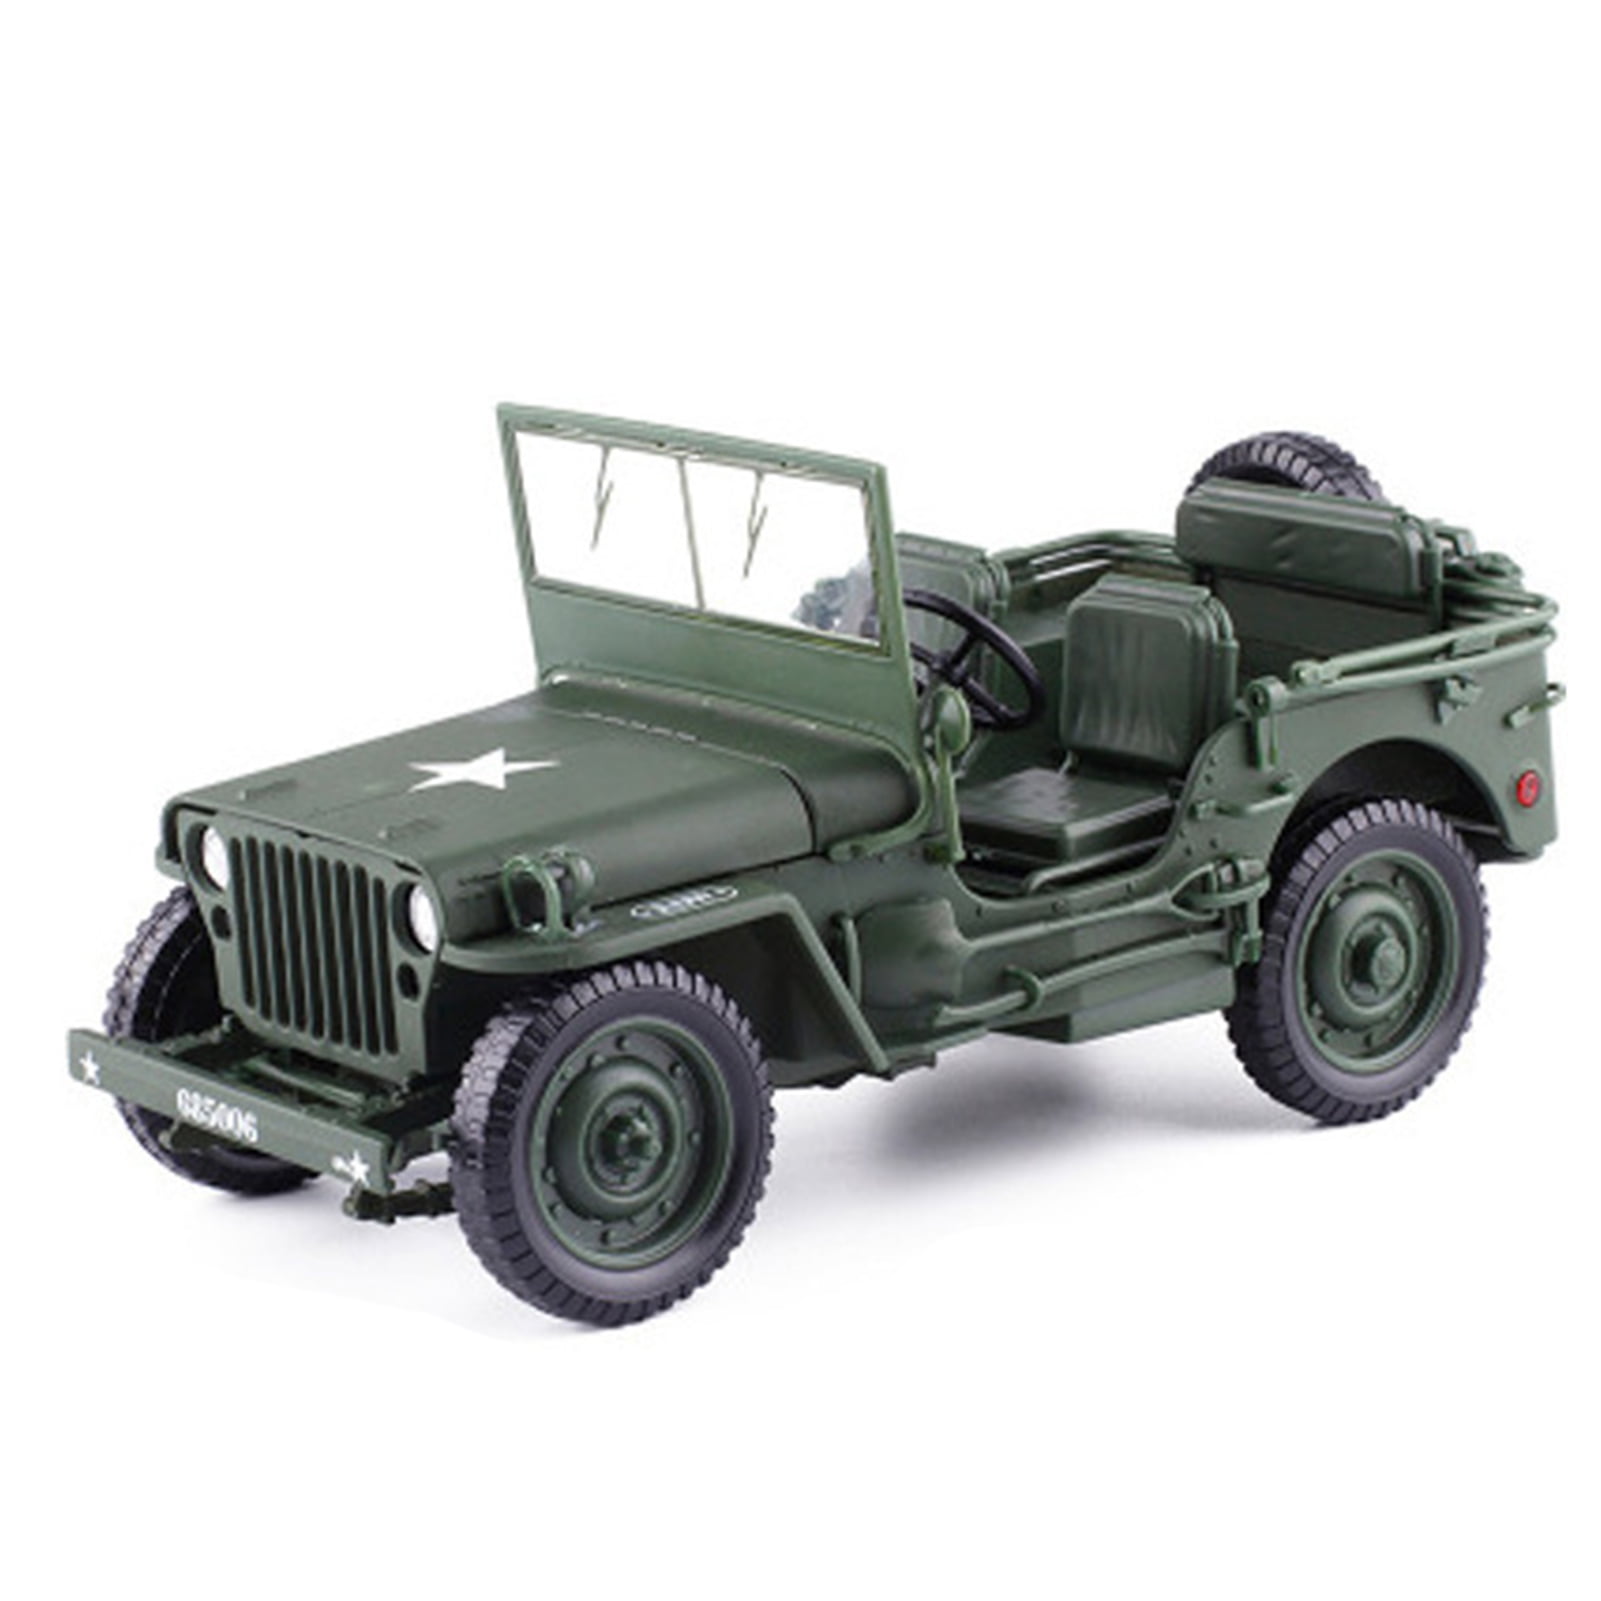 1/18 Scale Diecast Military Army Tactical Jeep Vehicle Model Toys KDW in box 